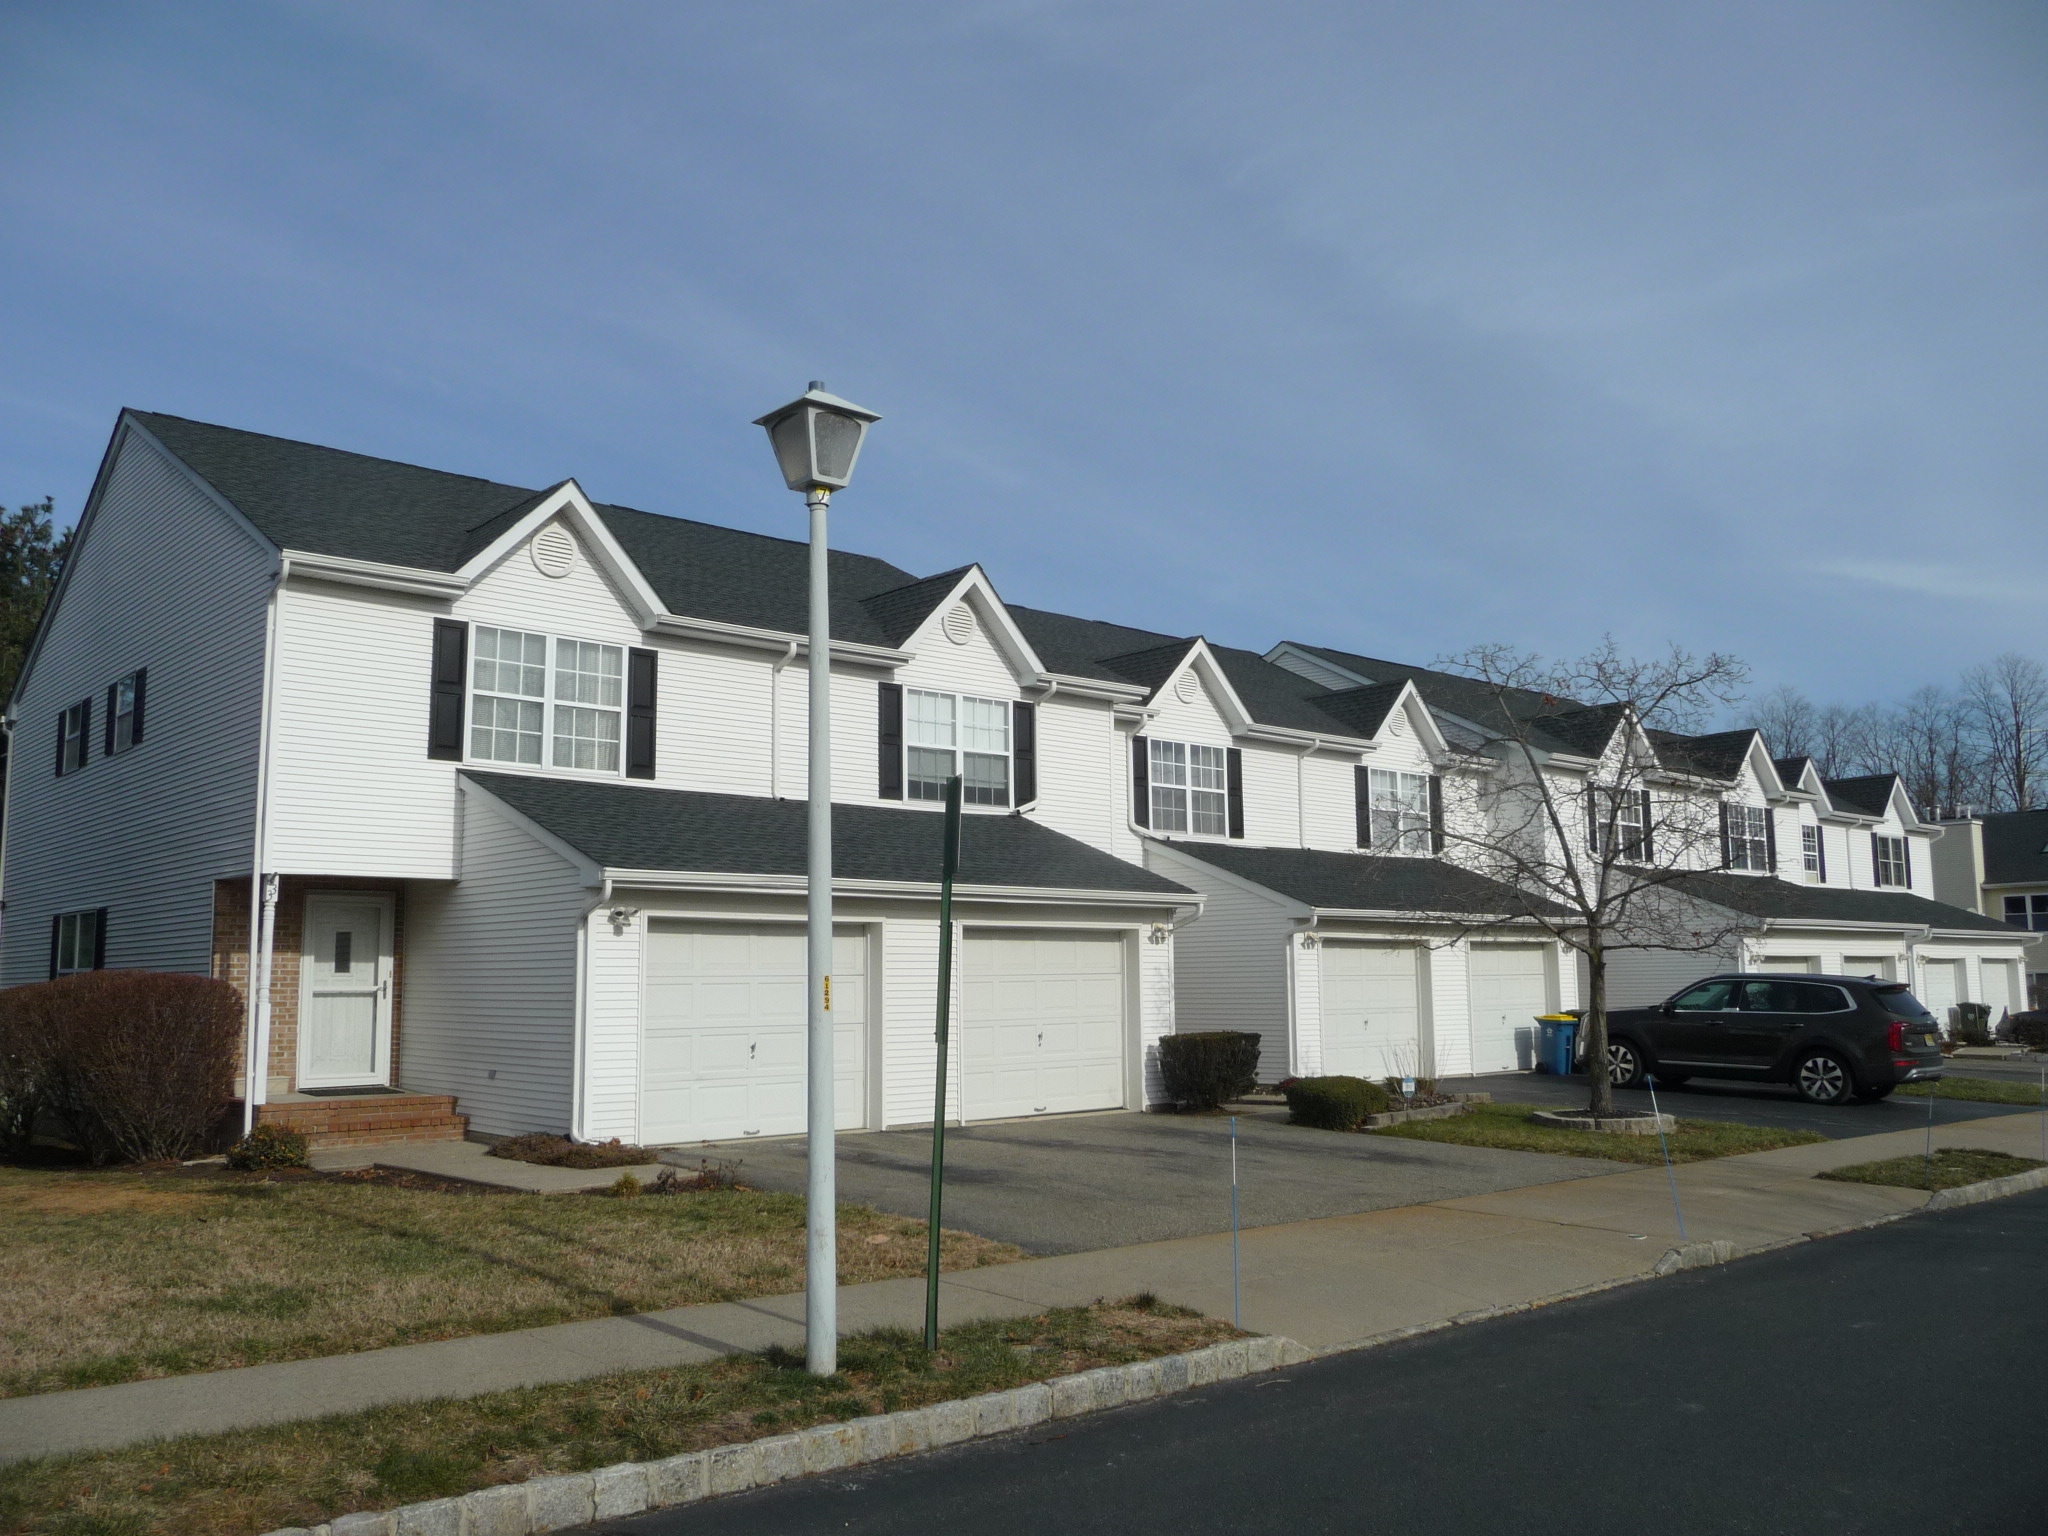 A row of townhouses in The Crossings at Aberdeen.